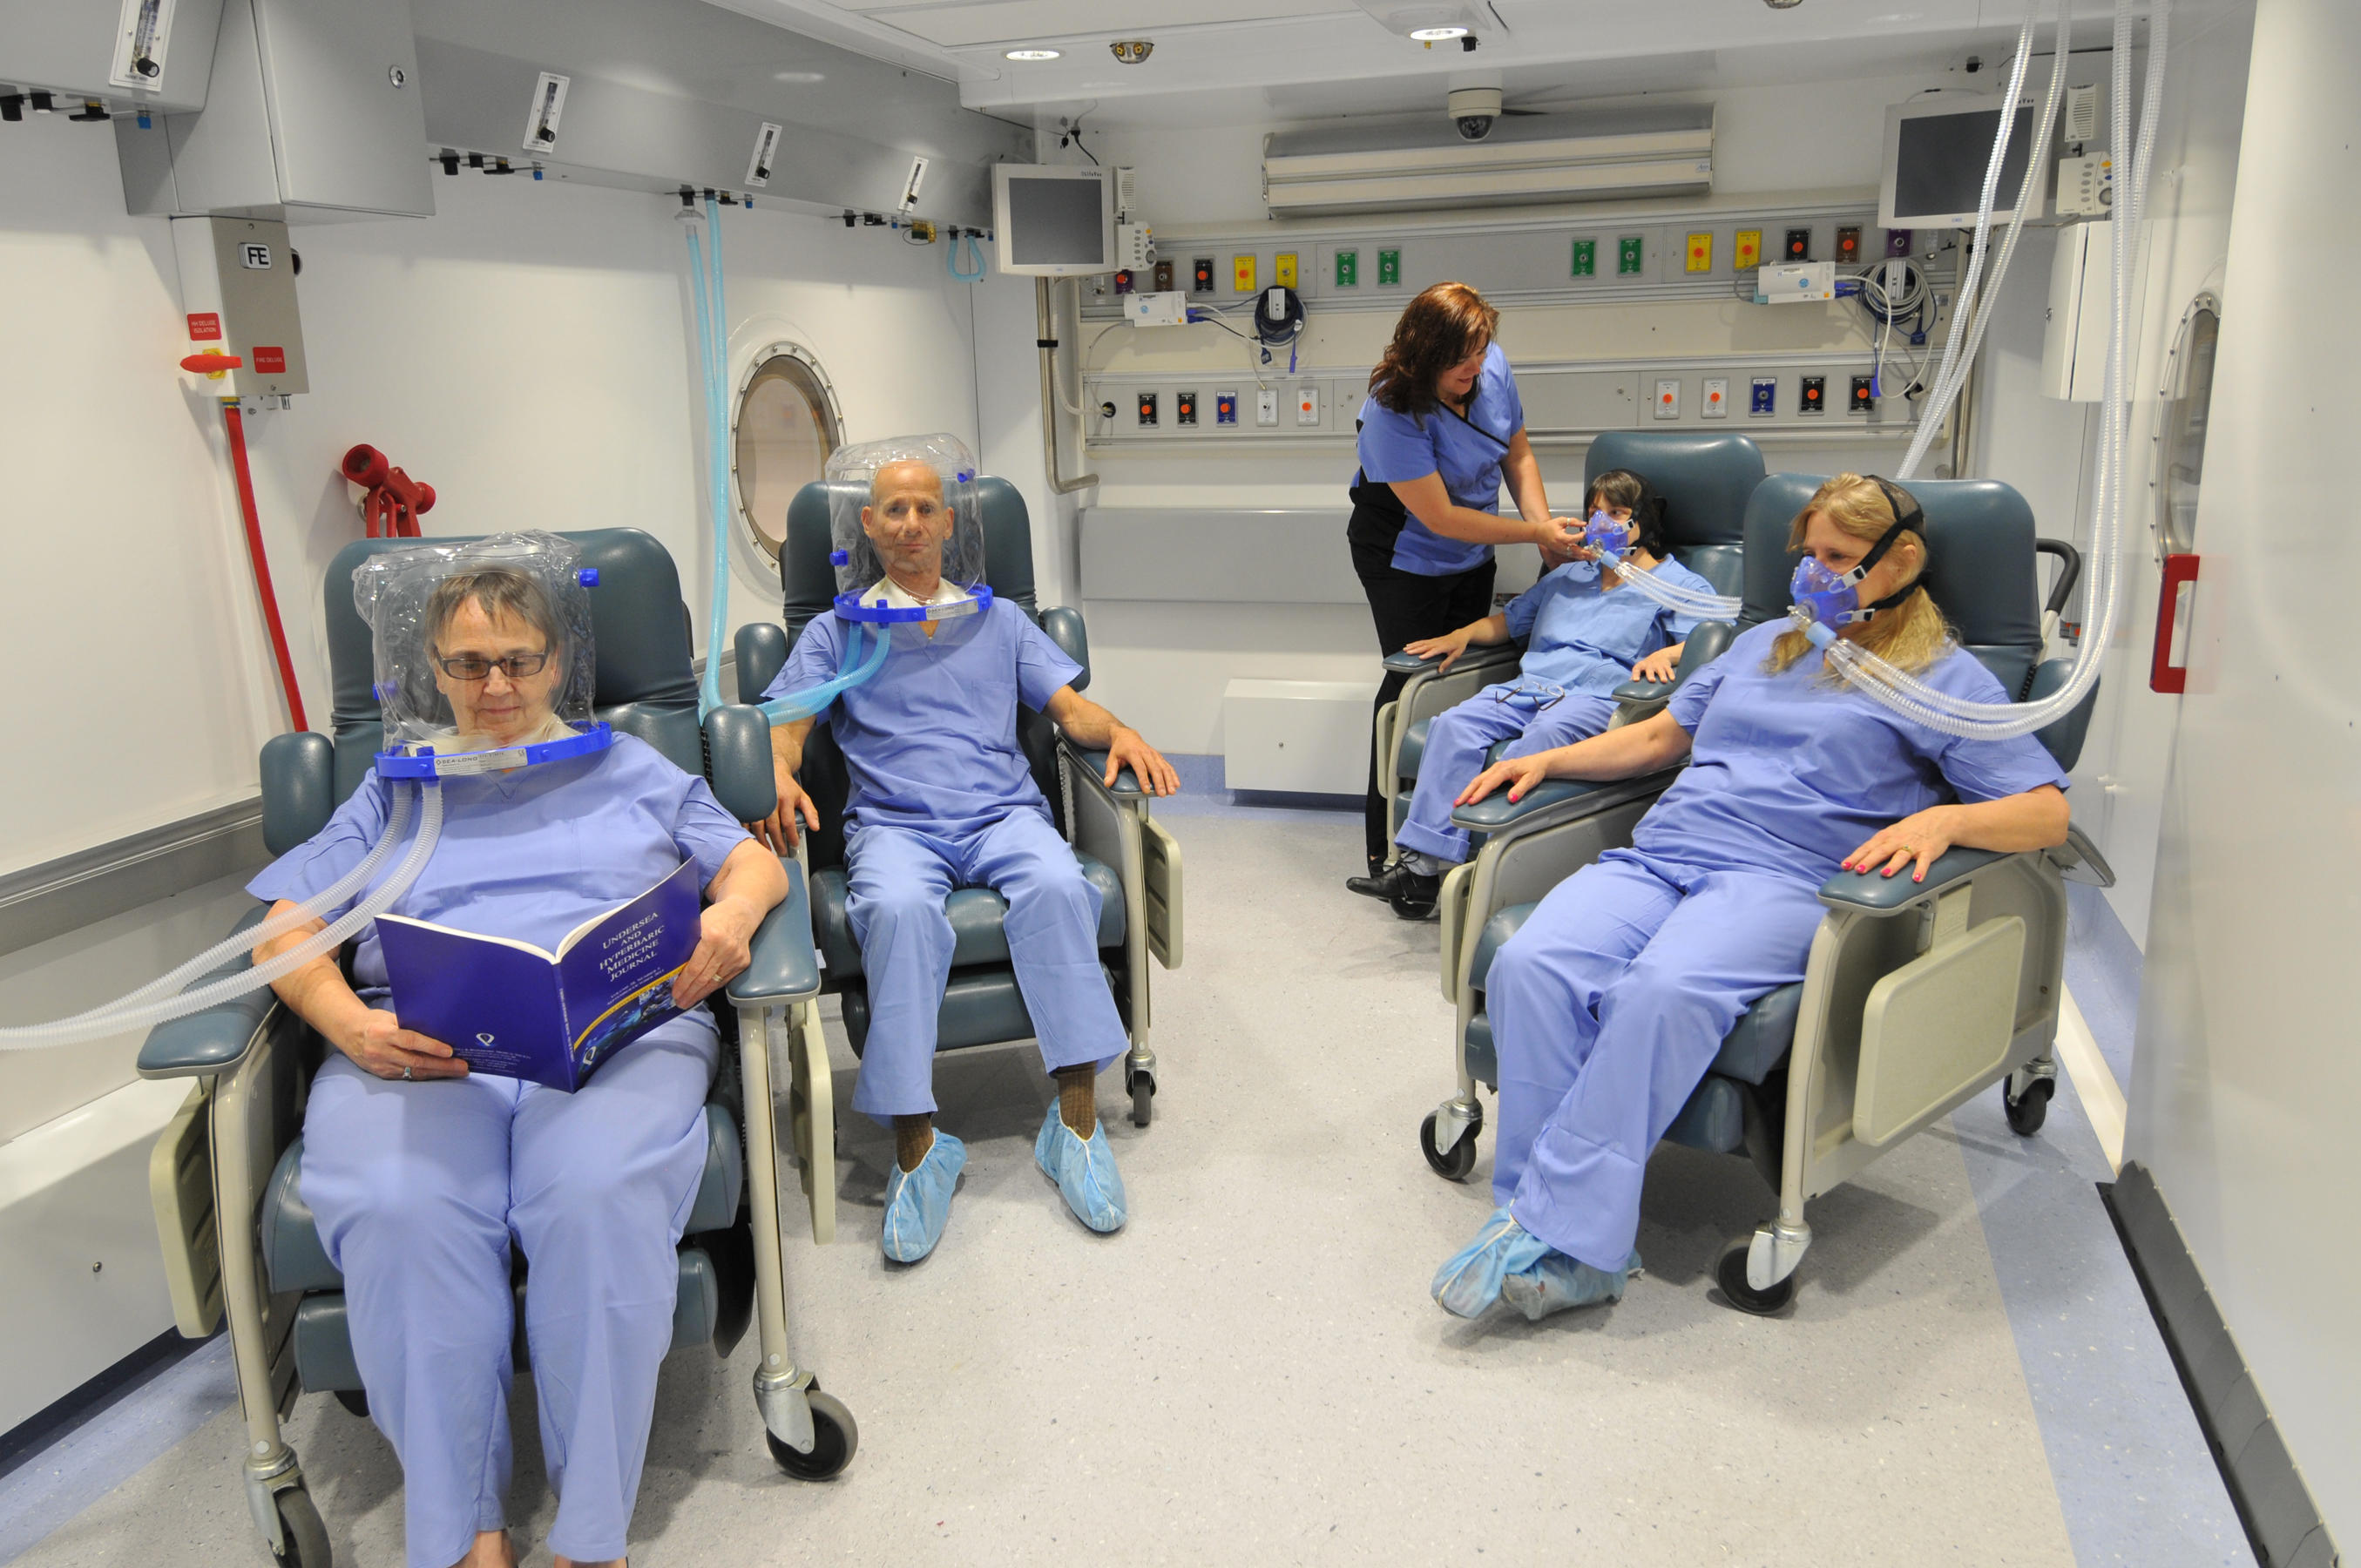 patients in the hyperbaric chamber decompression chamber for hyperbaric treatments in hyperbarics medicine unit